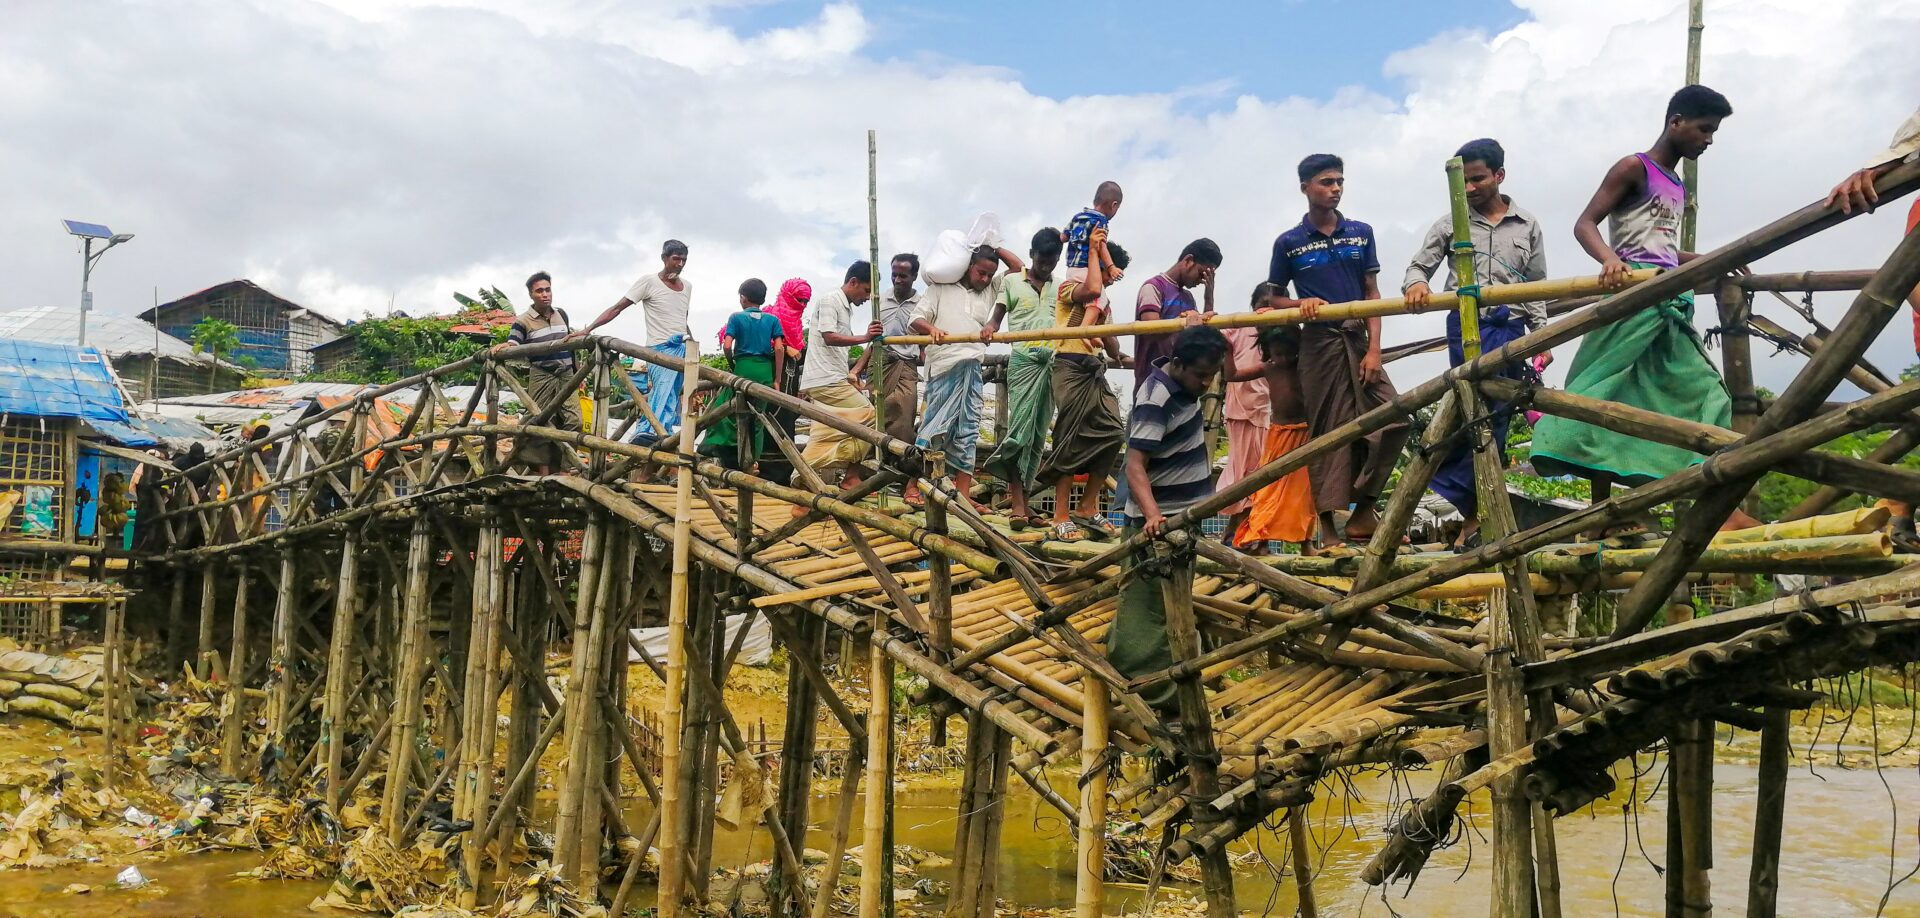 As climate change worsens, floods have become more severe in low-lying Rohingya camps (Sahat Zia Hero)